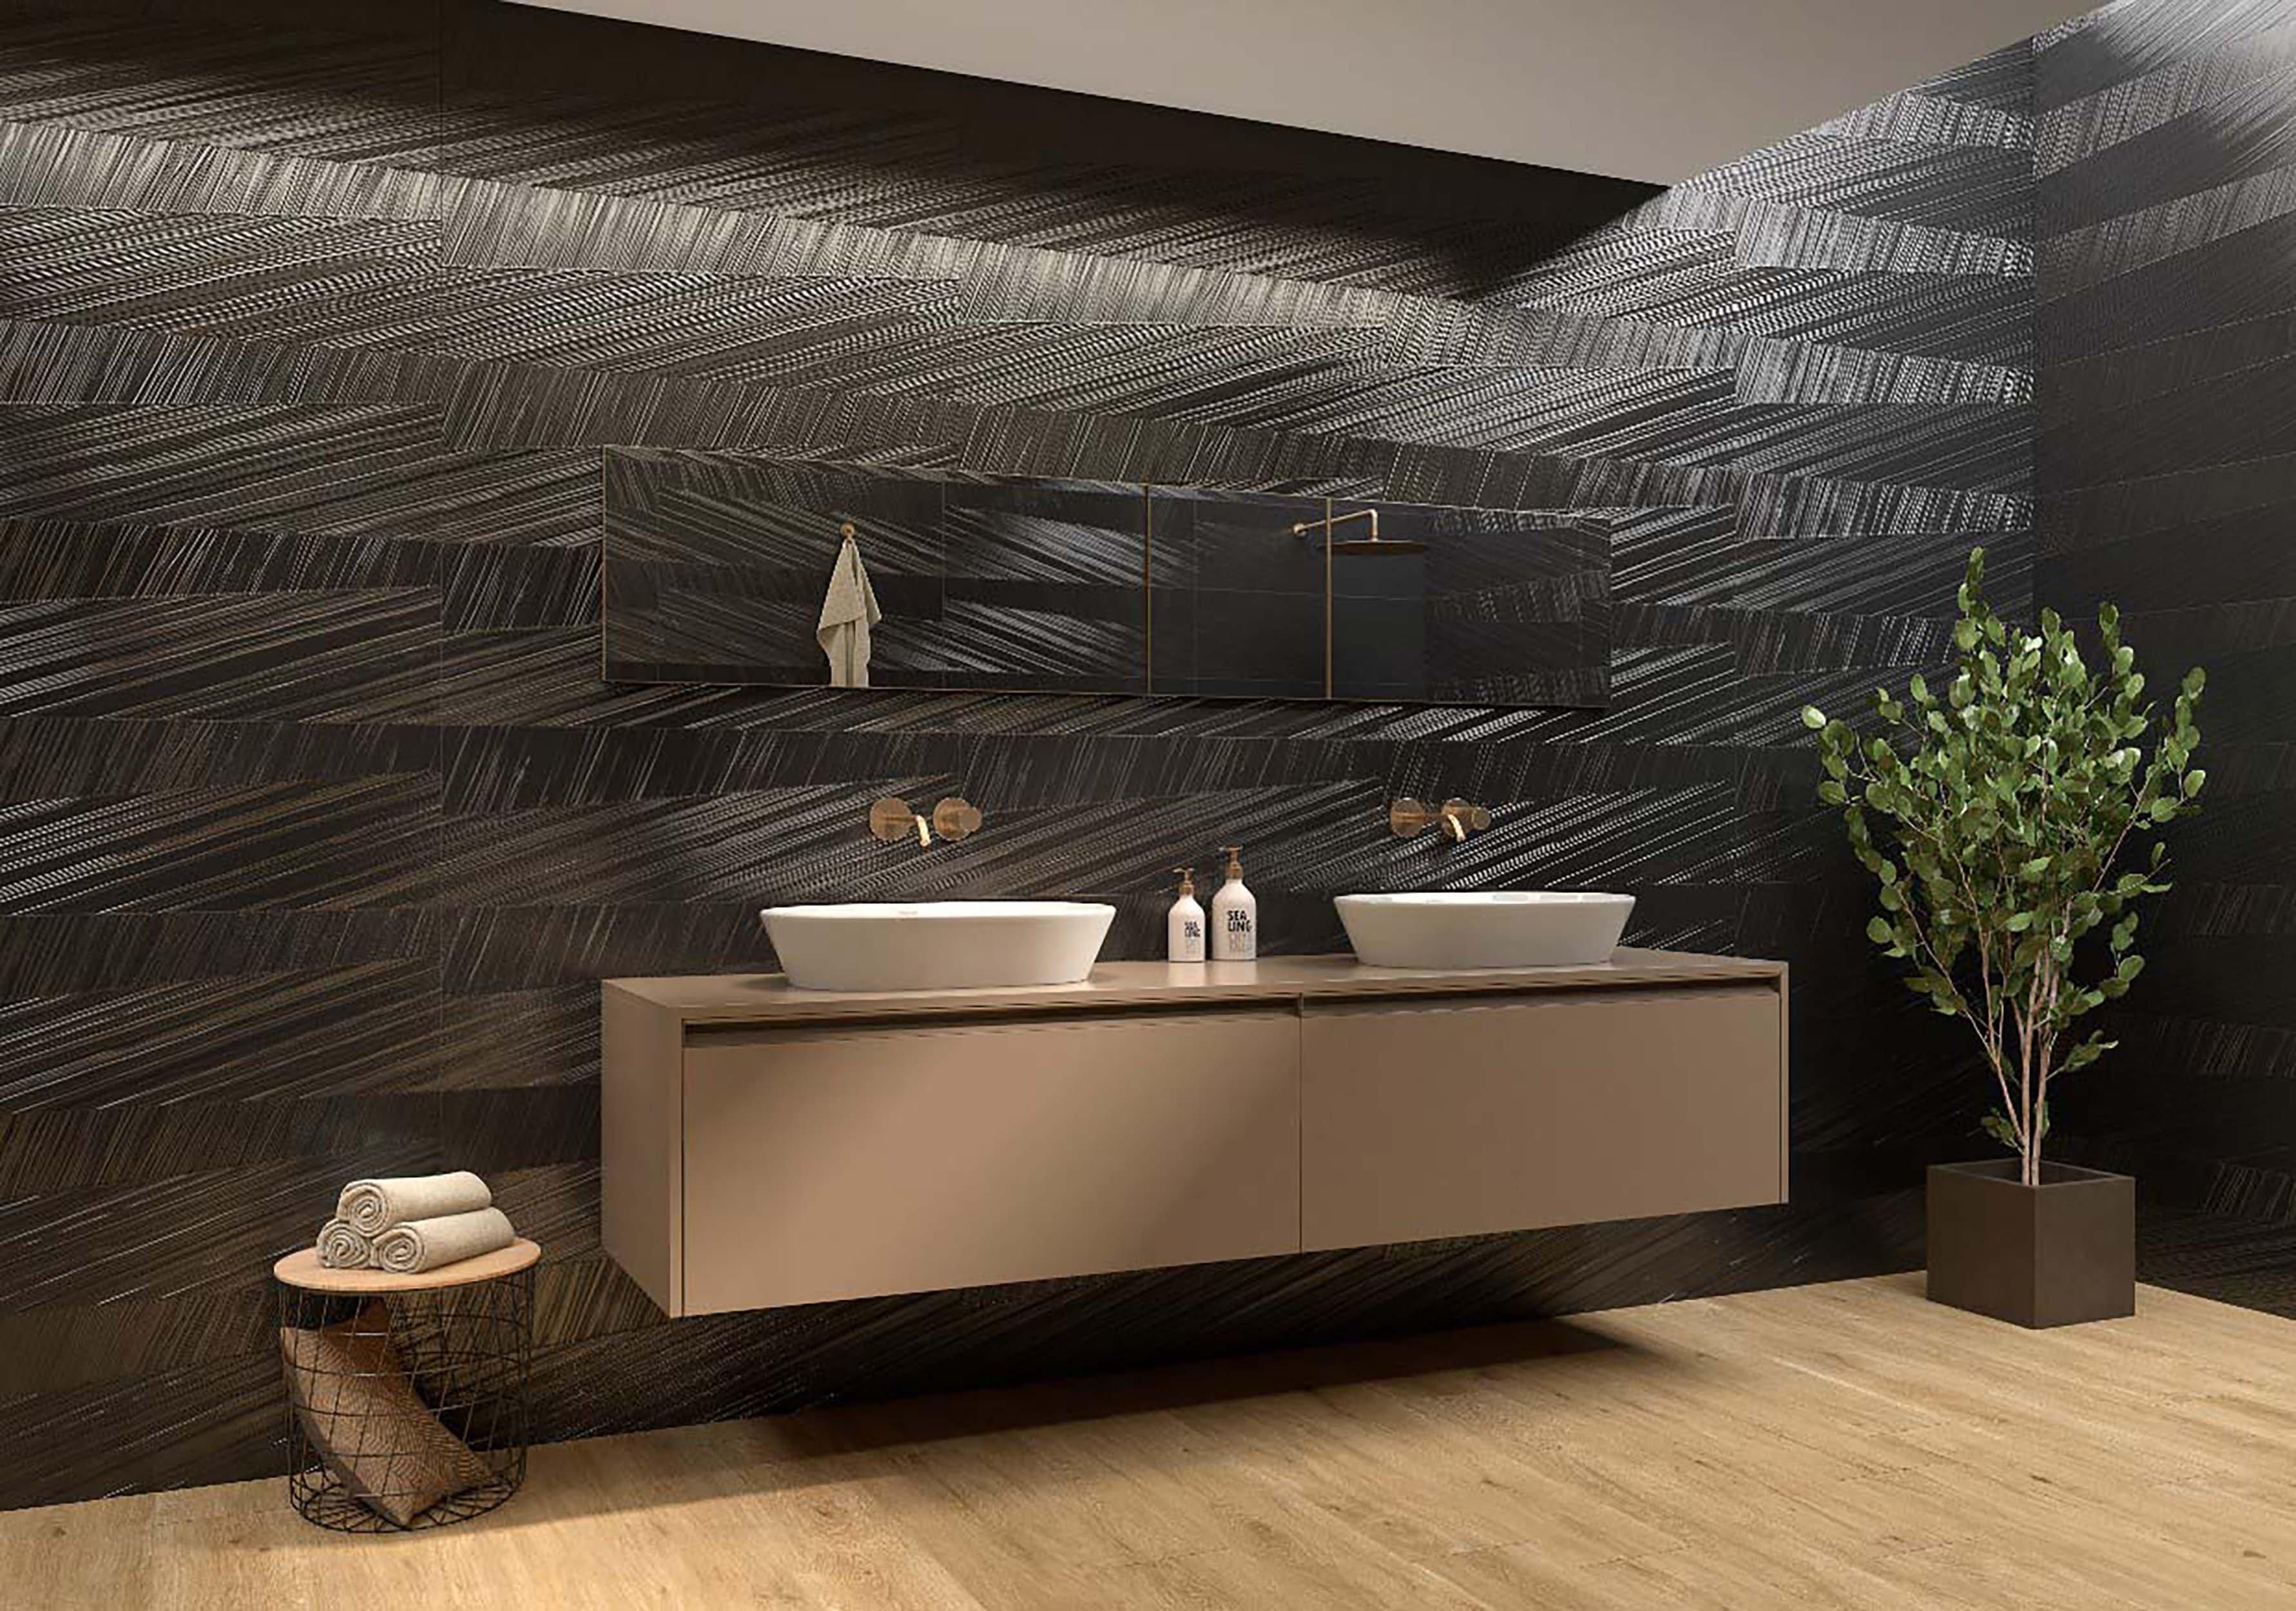 Piper Linear Wall Tile